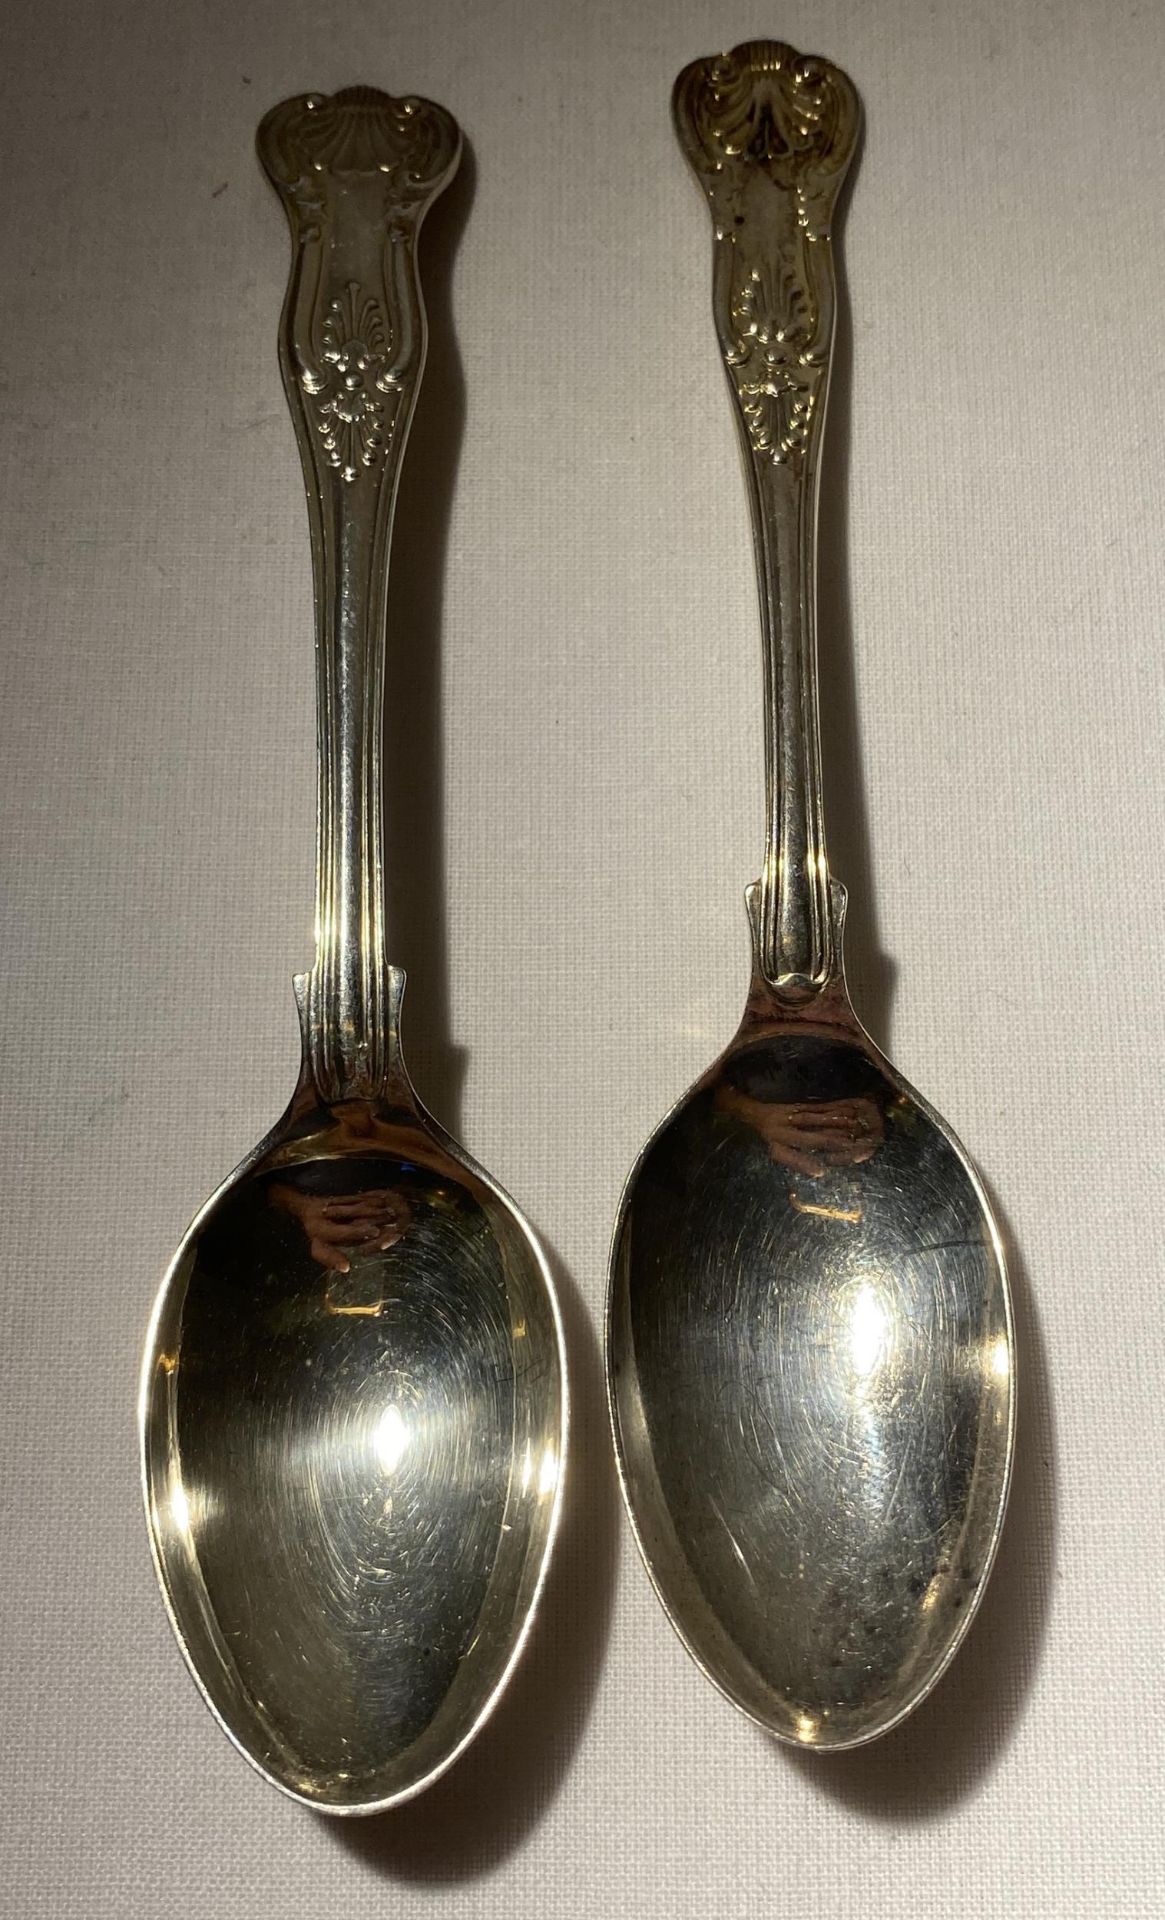 TWO SHEFFIELD HALLMARKED SILVER SPOONS, EARLIEST BEING 1925, MAKER WILLIAM HUTTON & SONS LTD, - Image 2 of 18